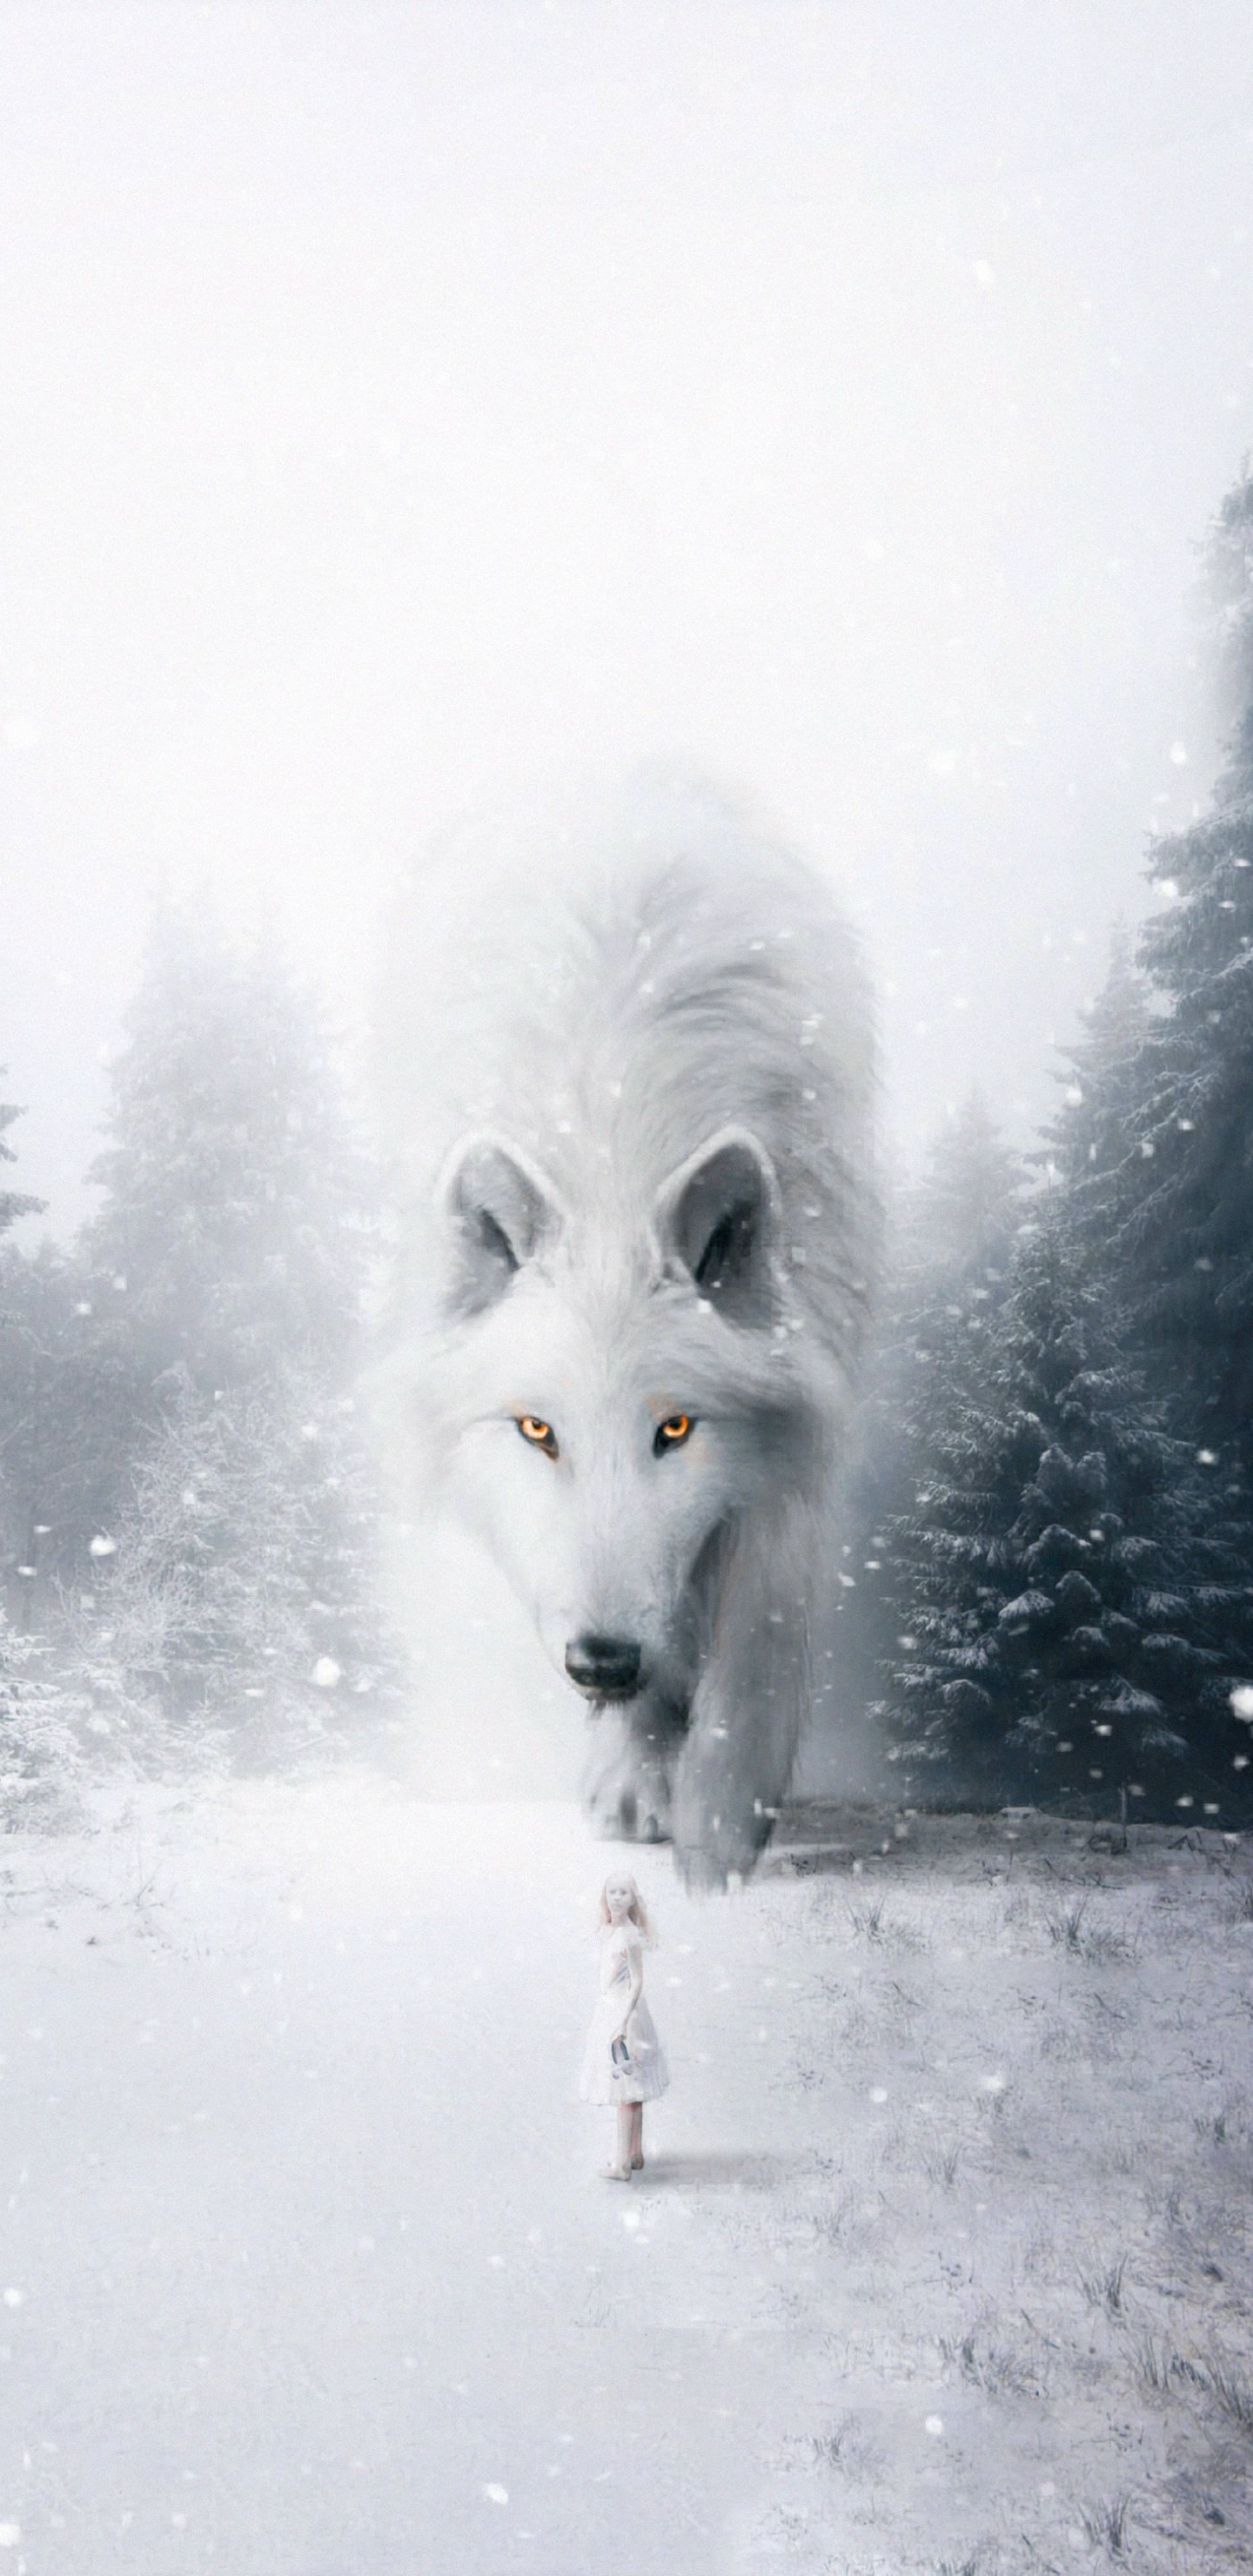 White Wolf on Snow Covered Ground During Daytime. Wallpaper in 1440x2960 Resolution